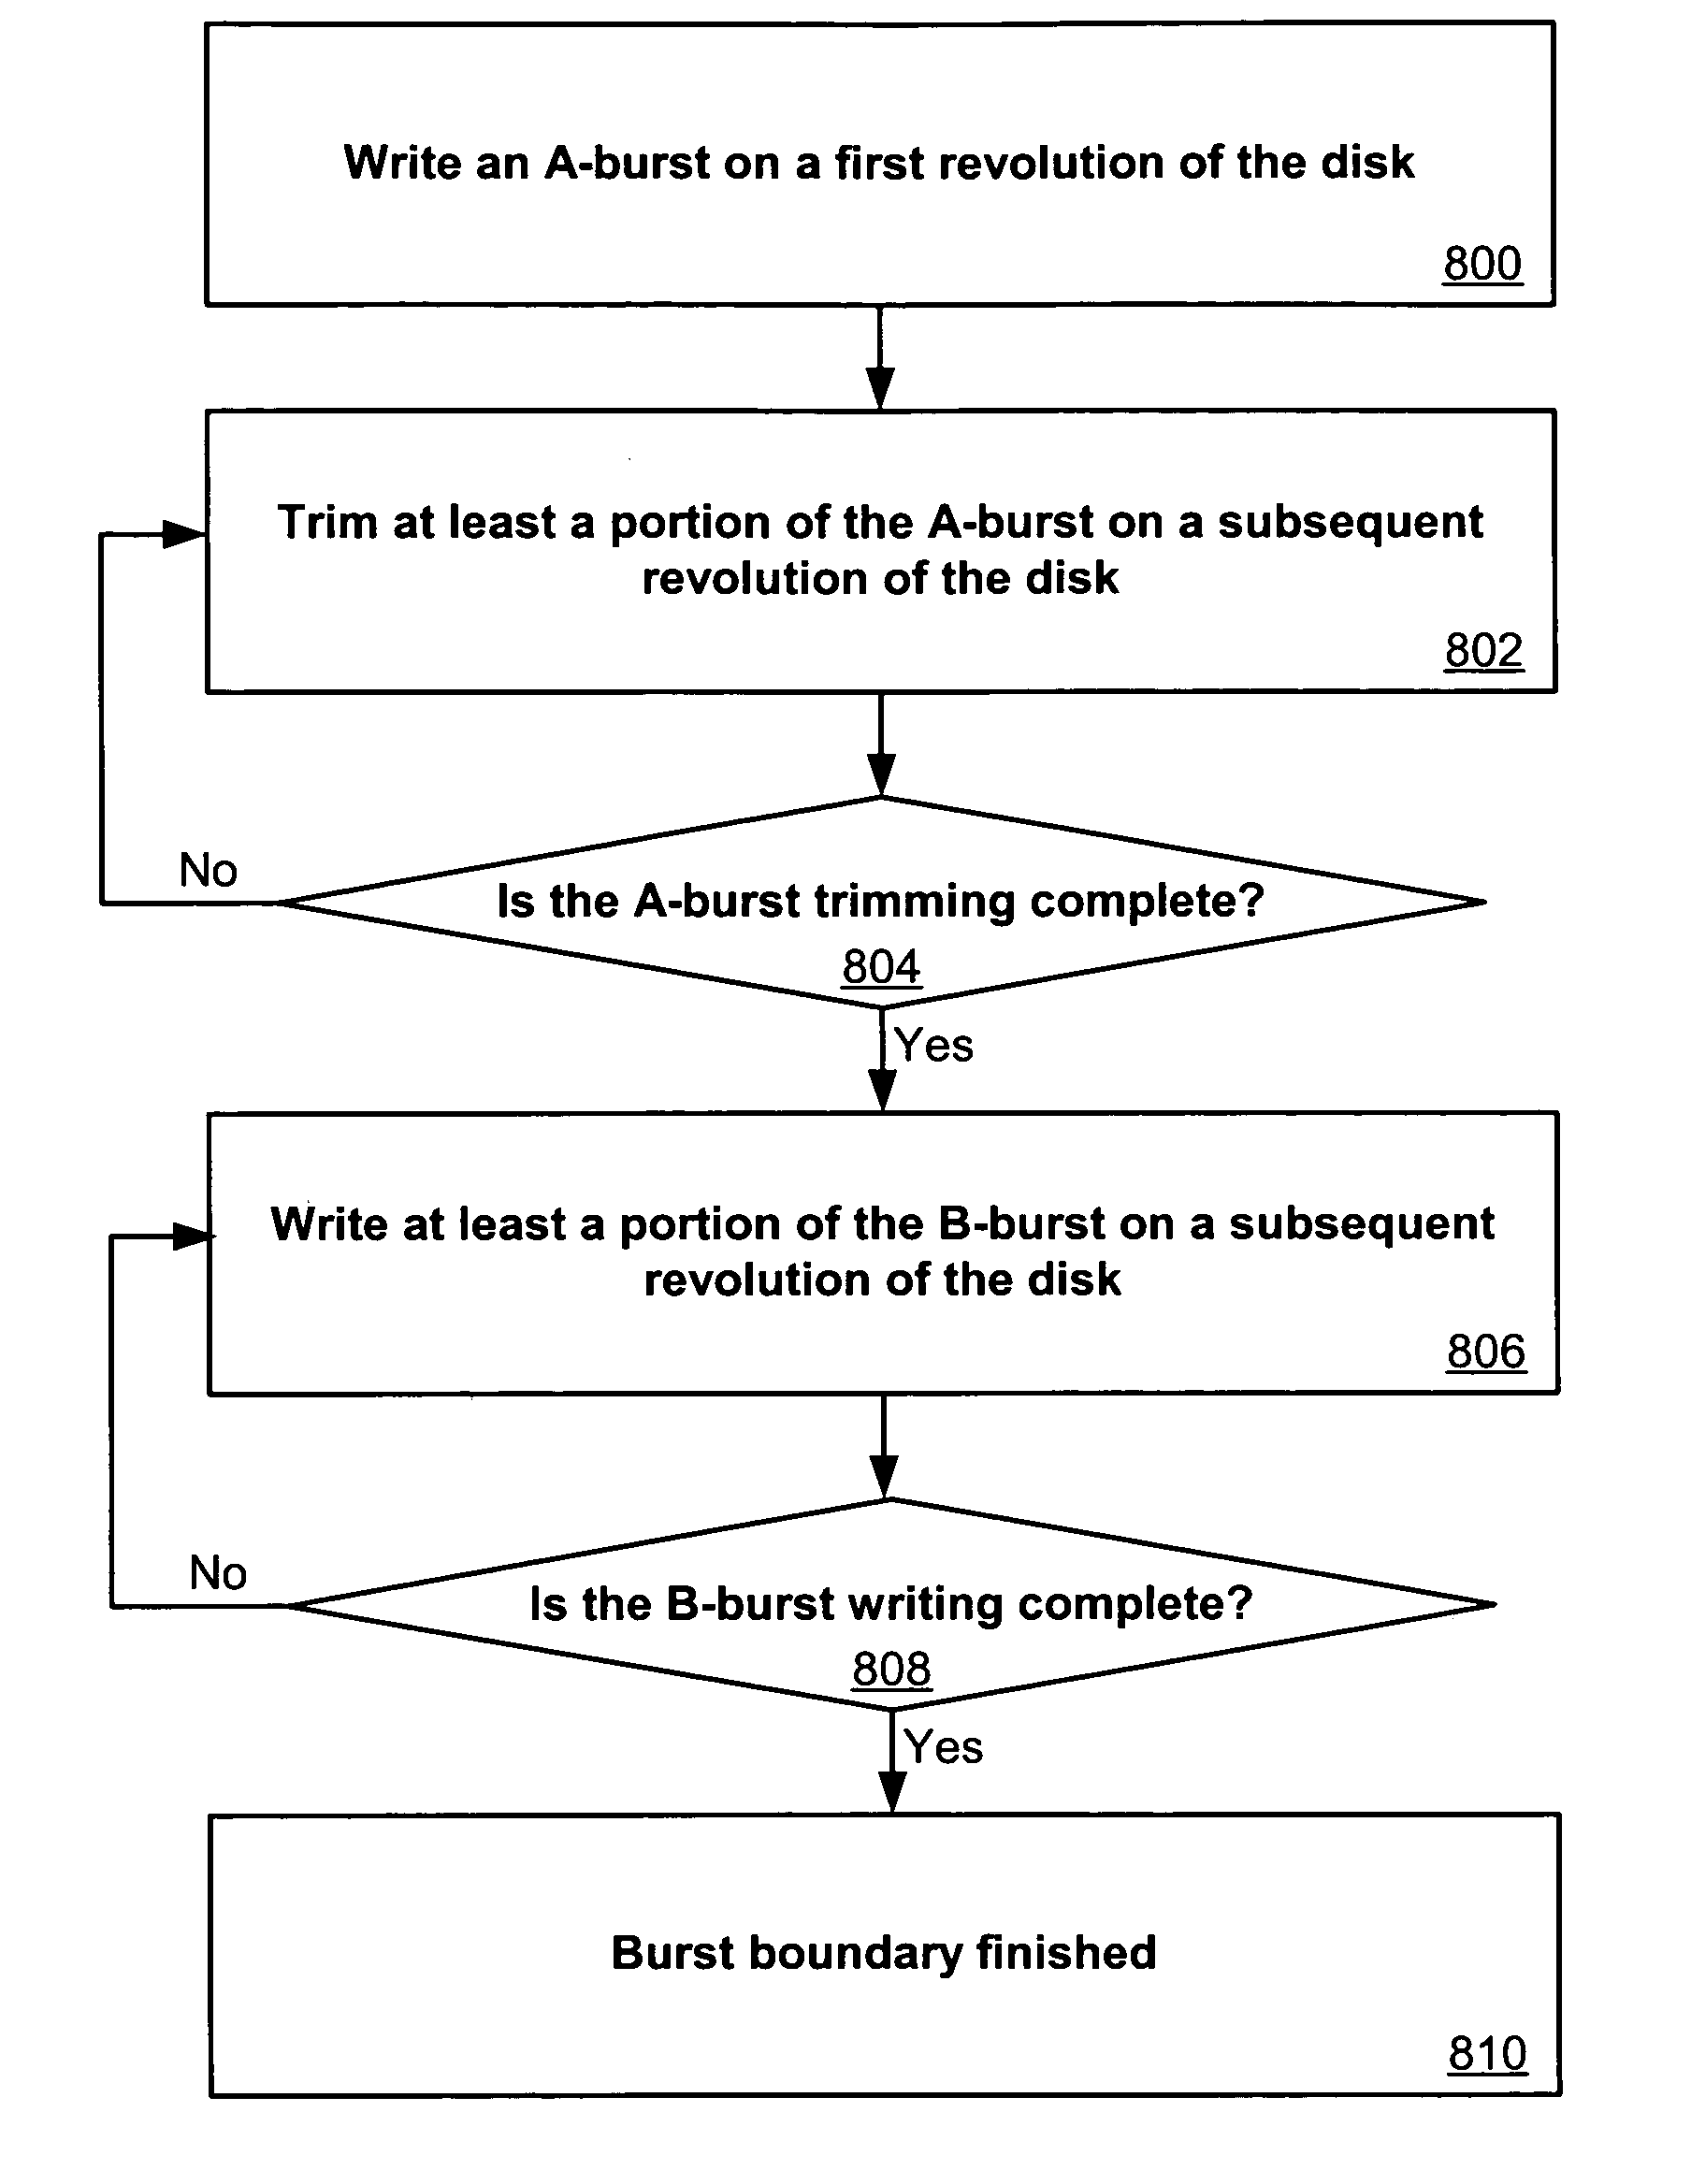 Systems using extended servo patterns with variable multi-pass servowriting and self-servowriting